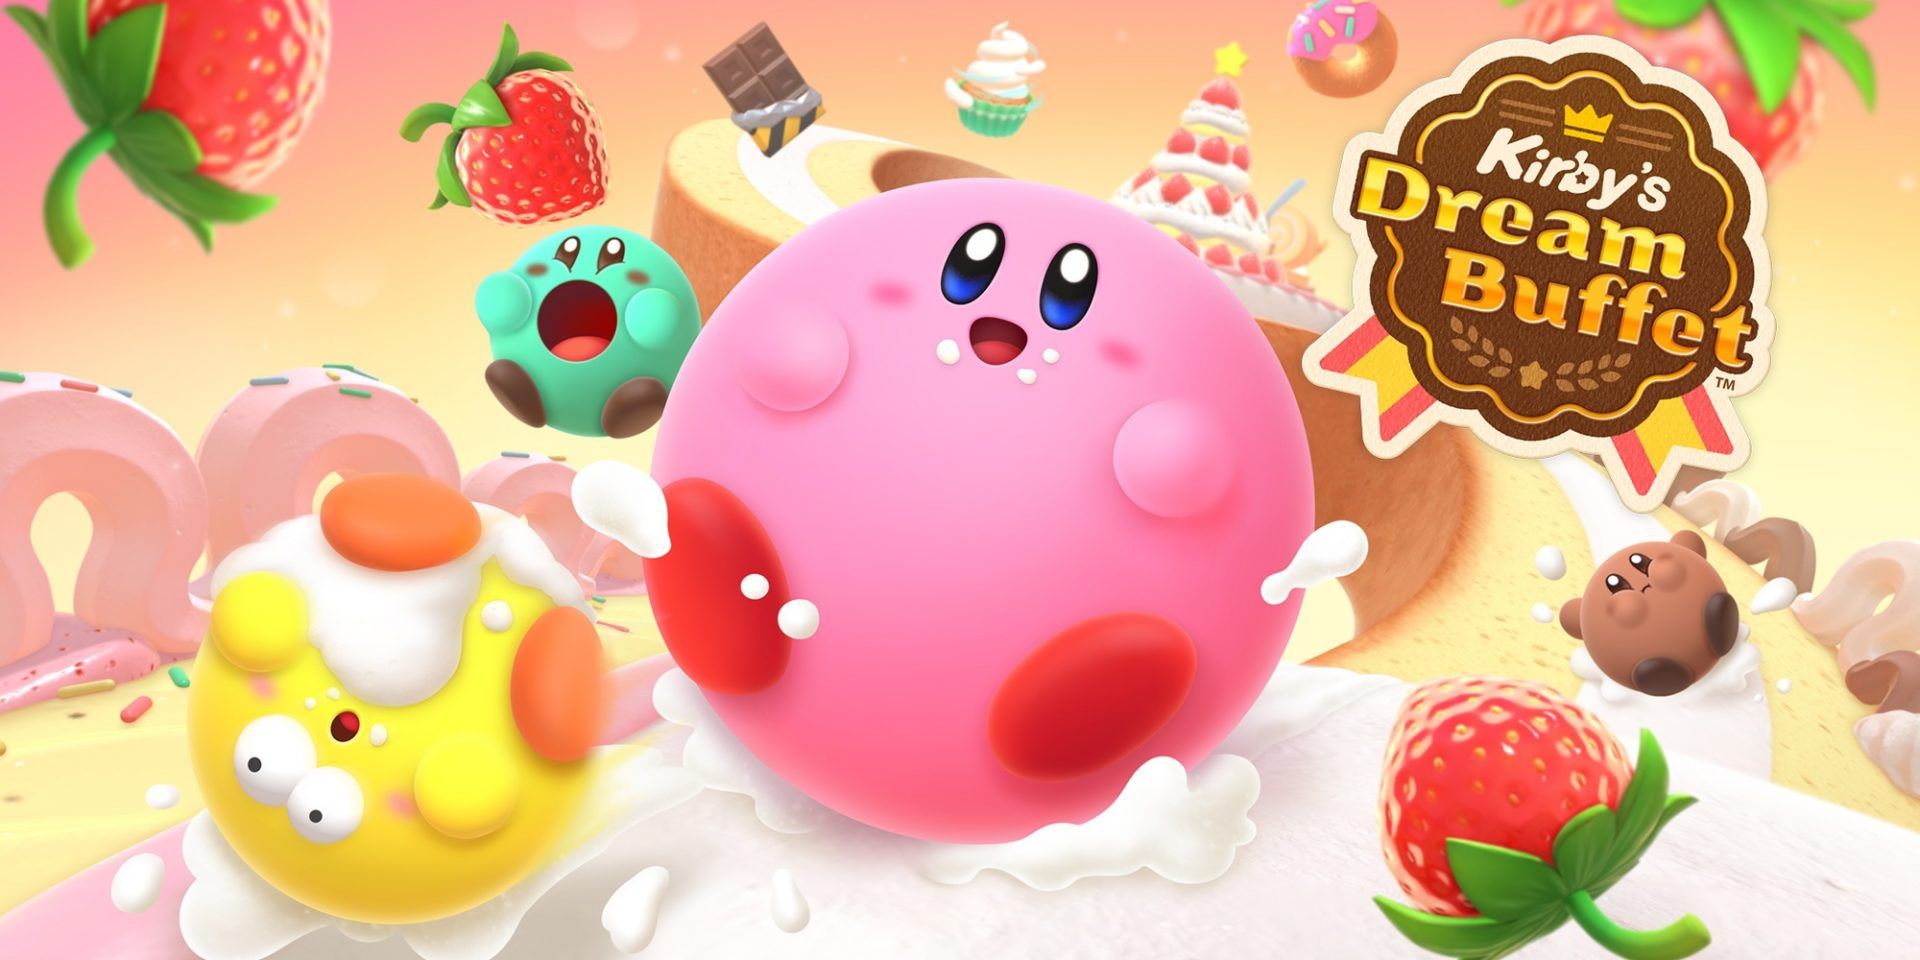 Several differently-colored Kirbys rolling around on a cake in official Kirby's Dream Buffet art